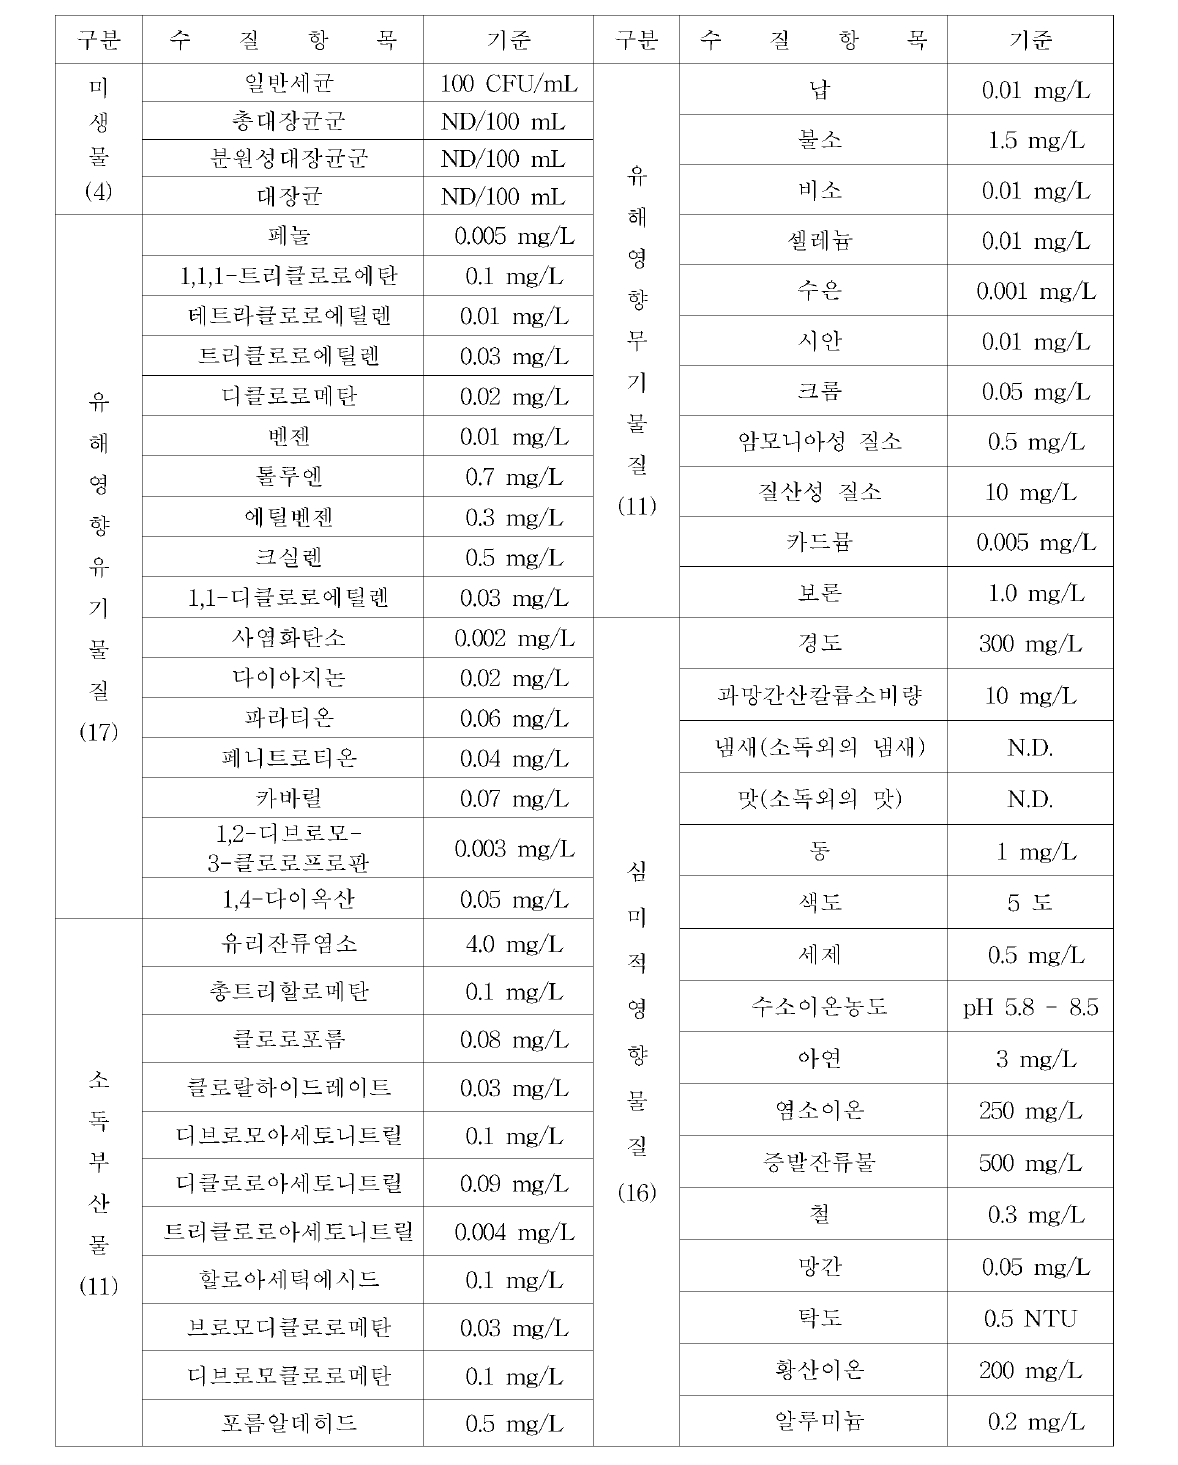 Drinking water standard values in Korea (59 compounds, 2015. 12)